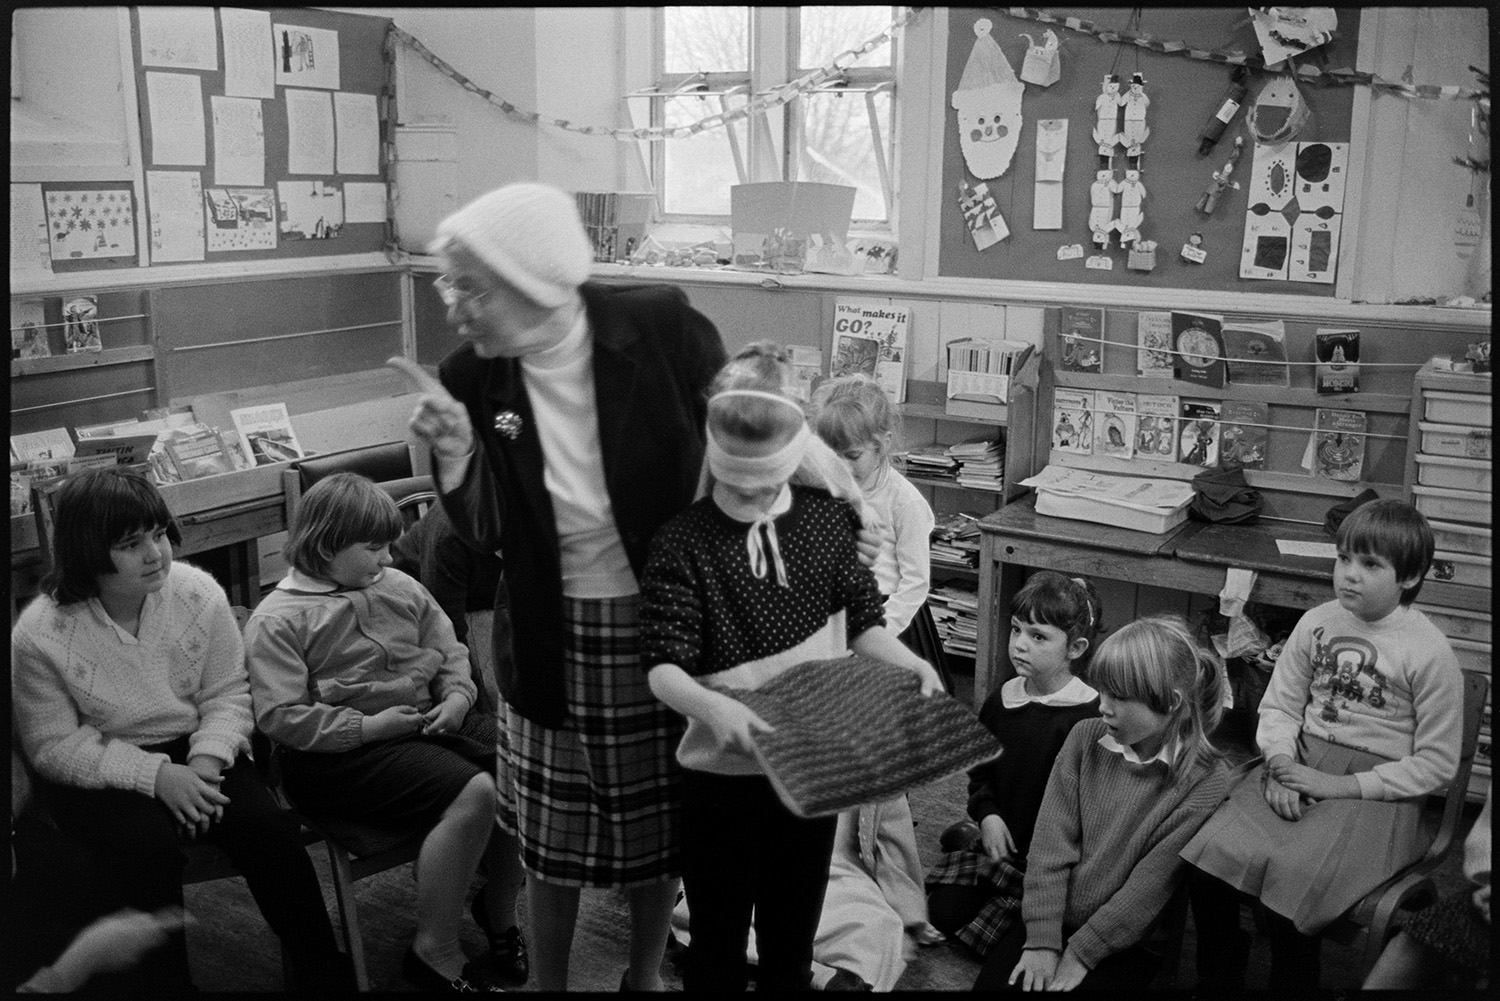 Christmas end of term party in primary school, games, teacher talking to pupils.
[A Christmas end of term party in a classroom at Chulmleigh Primary School. The children are playing party games and a woman is guiding a young pupil who is blindfolded and carrying a cushion, while other pupils sit and watch. There are paper chains and decorations around the classroom, alongside noticeboards, desks and shelves of books.]